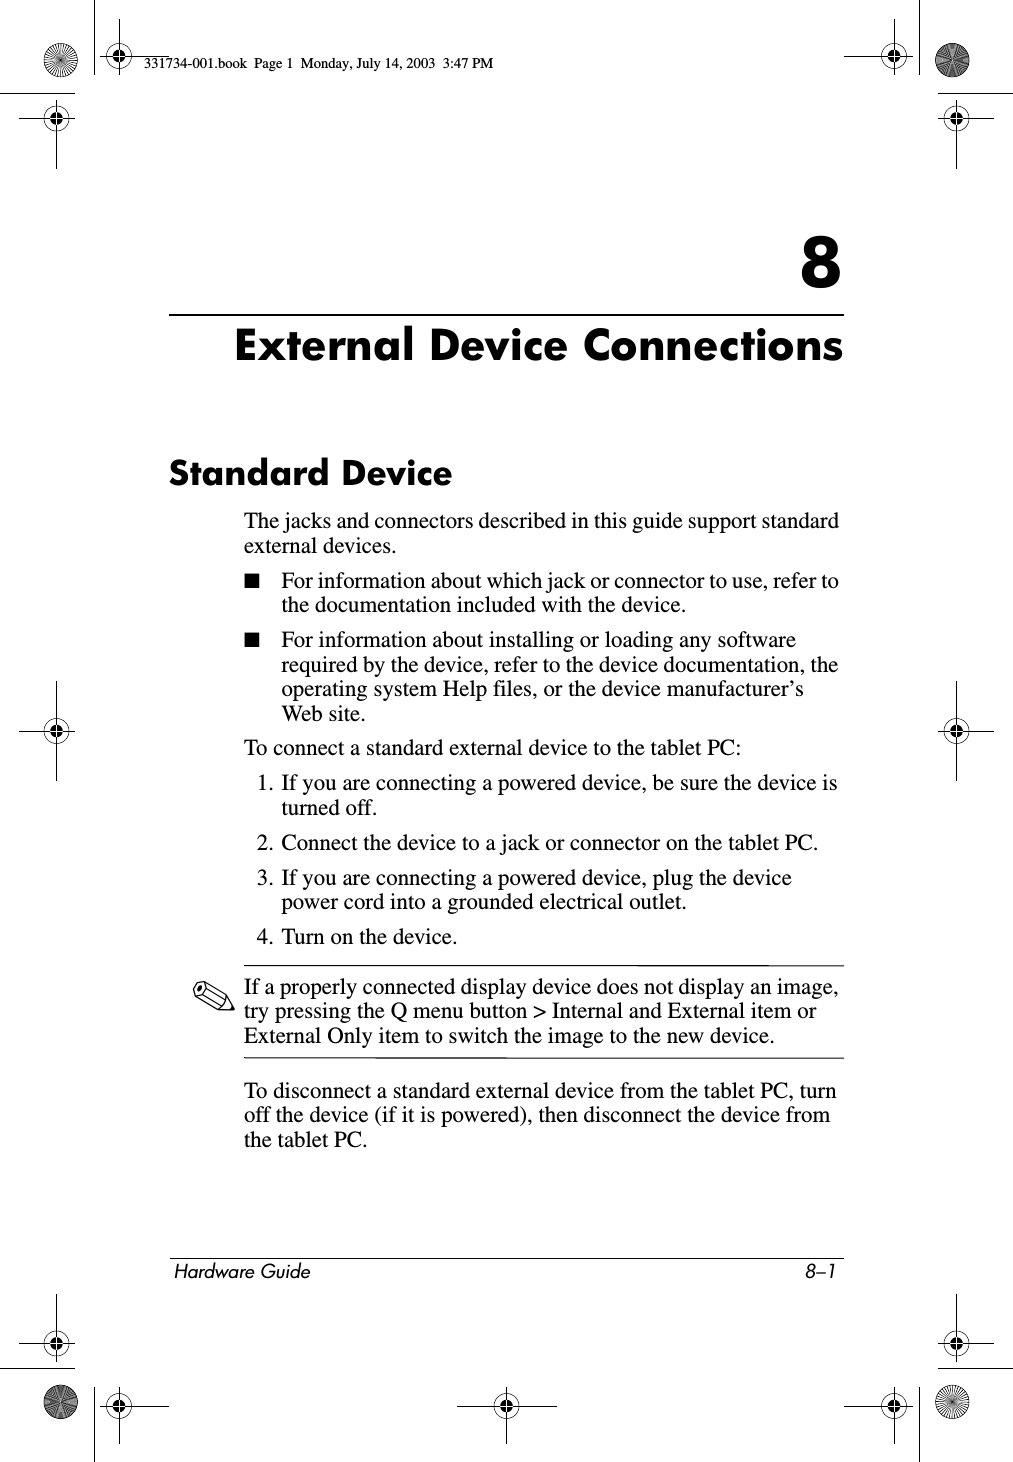 Hardware Guide 8–18External Device ConnectionsStandard DeviceThe jacks and connectors described in this guide support standard external devices.■For information about which jack or connector to use, refer to the documentation included with the device.■For information about installing or loading any software required by the device, refer to the device documentation, the operating system Help files, or the device manufacturer’s Web site.To connect a standard external device to the tablet PC:1. If you are connecting a powered device, be sure the device is turned off.2. Connect the device to a jack or connector on the tablet PC.3. If you are connecting a powered device, plug the device power cord into a grounded electrical outlet.4. Turn on the device.✎If a properly connected display device does not display an image, try pressing the Q menu button &gt; Internal and External item or External Only item to switch the image to the new device.To disconnect a standard external device from the tablet PC, turn off the device (if it is powered), then disconnect the device from the tablet PC.331734-001.book  Page 1  Monday, July 14, 2003  3:47 PM